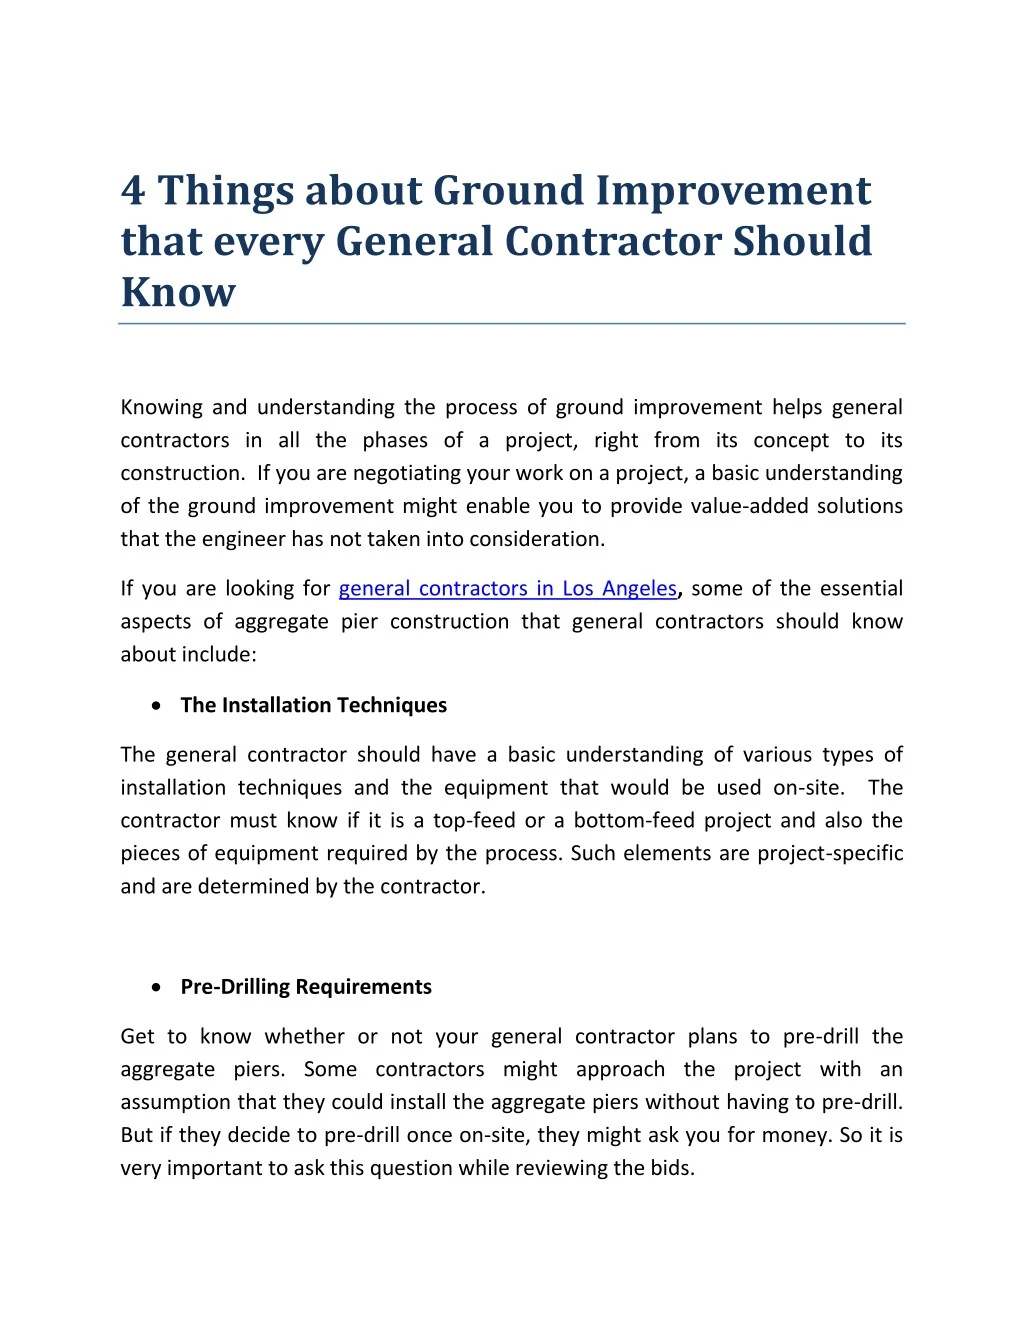 4 things about ground improvement that every